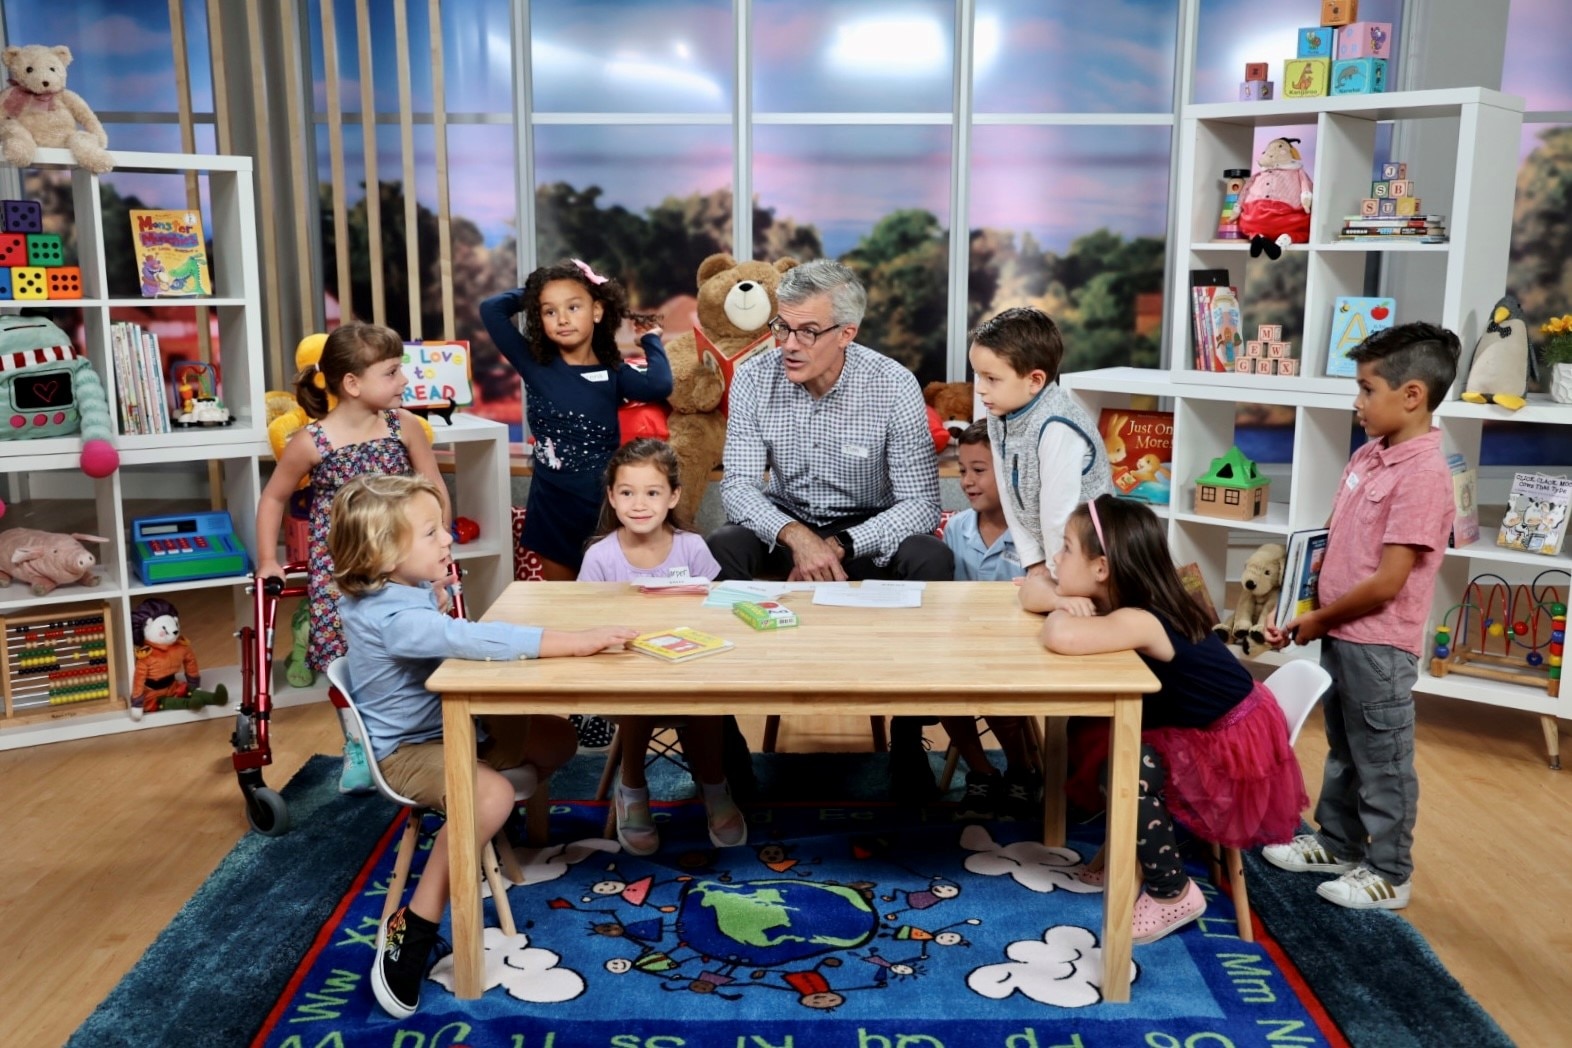 Vanguard CEO Tim Buckley sits on a chair behind a child-size wooden table in a brightly decorated room filled with books and children’s toys. Four children, 4 to 6 years old, are seated in small chairs at the table and four more children are standing. The children listen as Tim speaks with a boy seated at far left. 